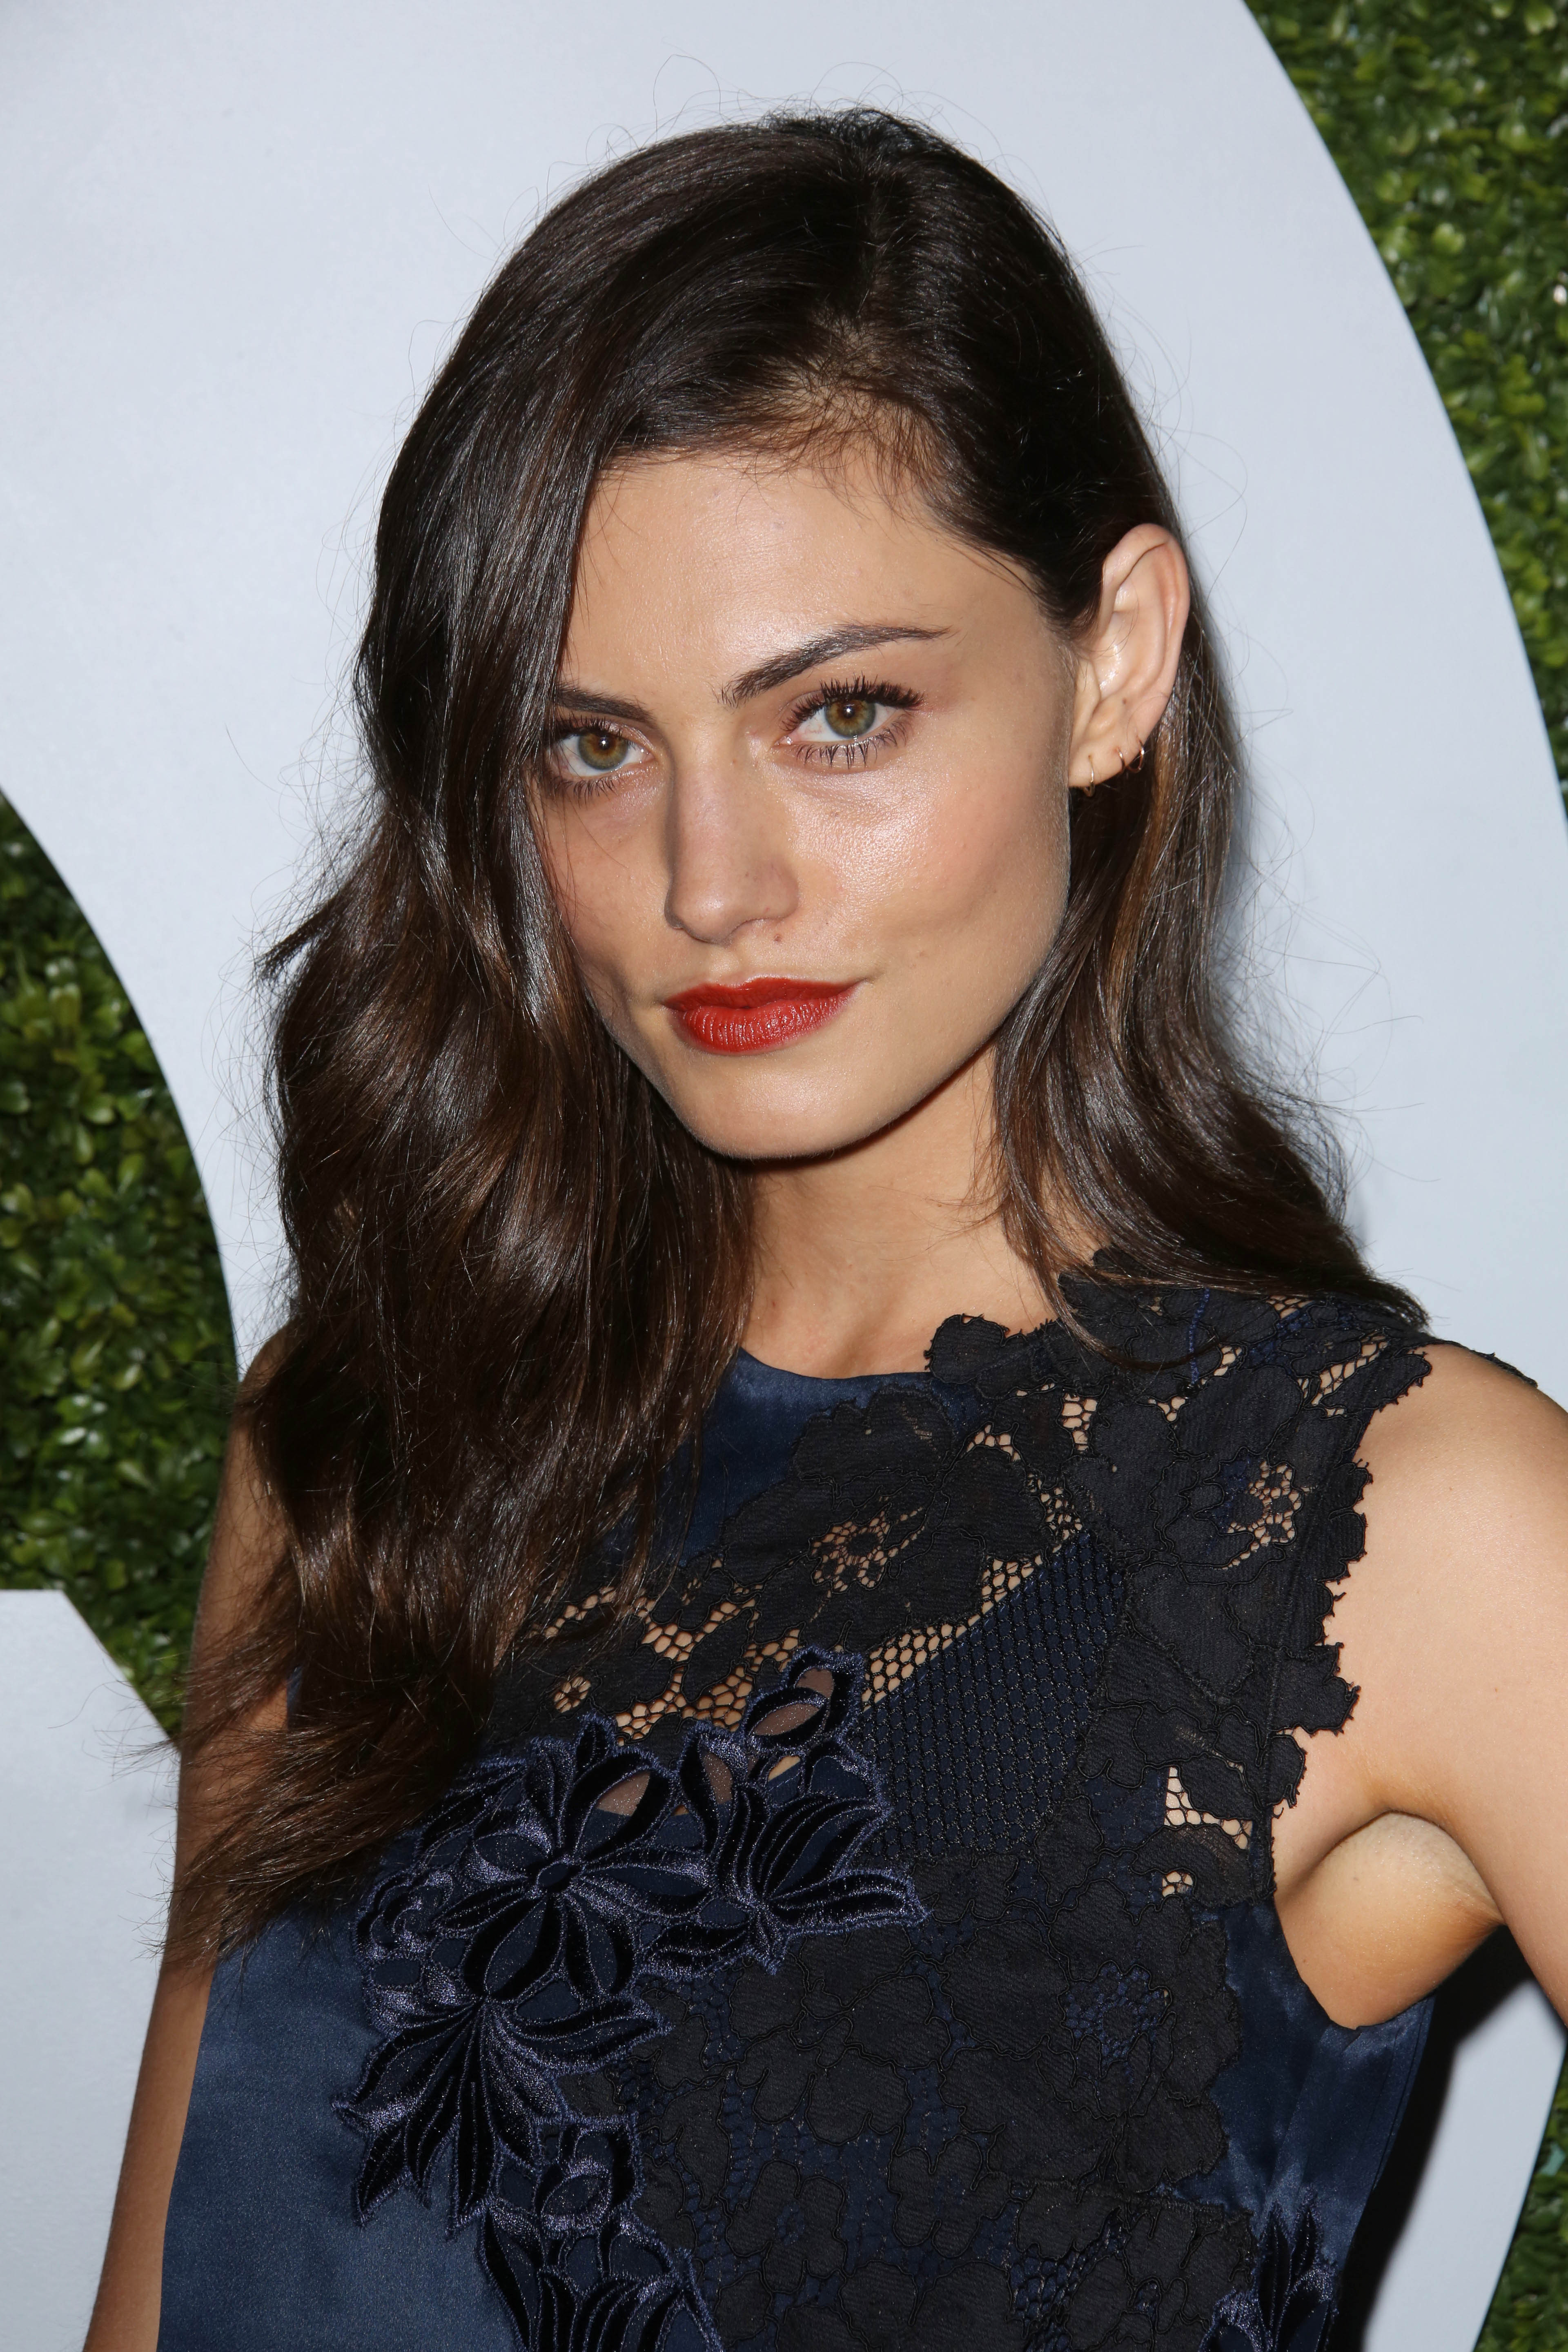 Actress Phoebe Tonkin arrives at the 2014 GQ Men Of The Year Party at Chateau Marmont on December 4, 2014 in Los Angeles, California.